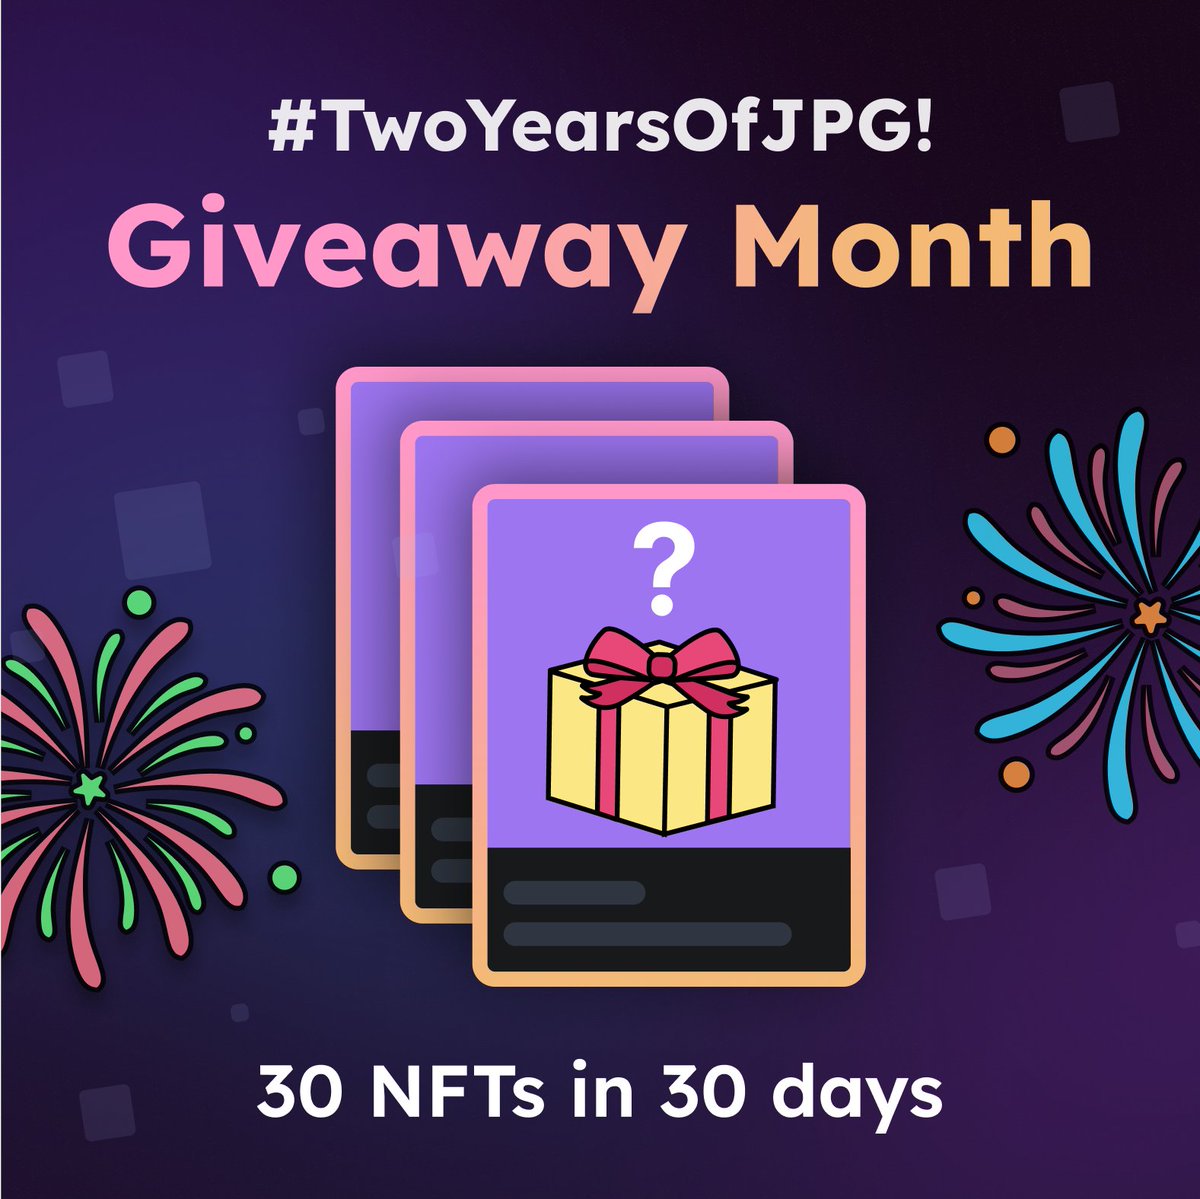 JPG Store will be turning 2 years old in November! And we’re gonna celebrate IN STYLE 👏 30 days, 30 giveaways to our users 🎁 A wallet with all the prizes will be shared soon, stay tuned… 👀